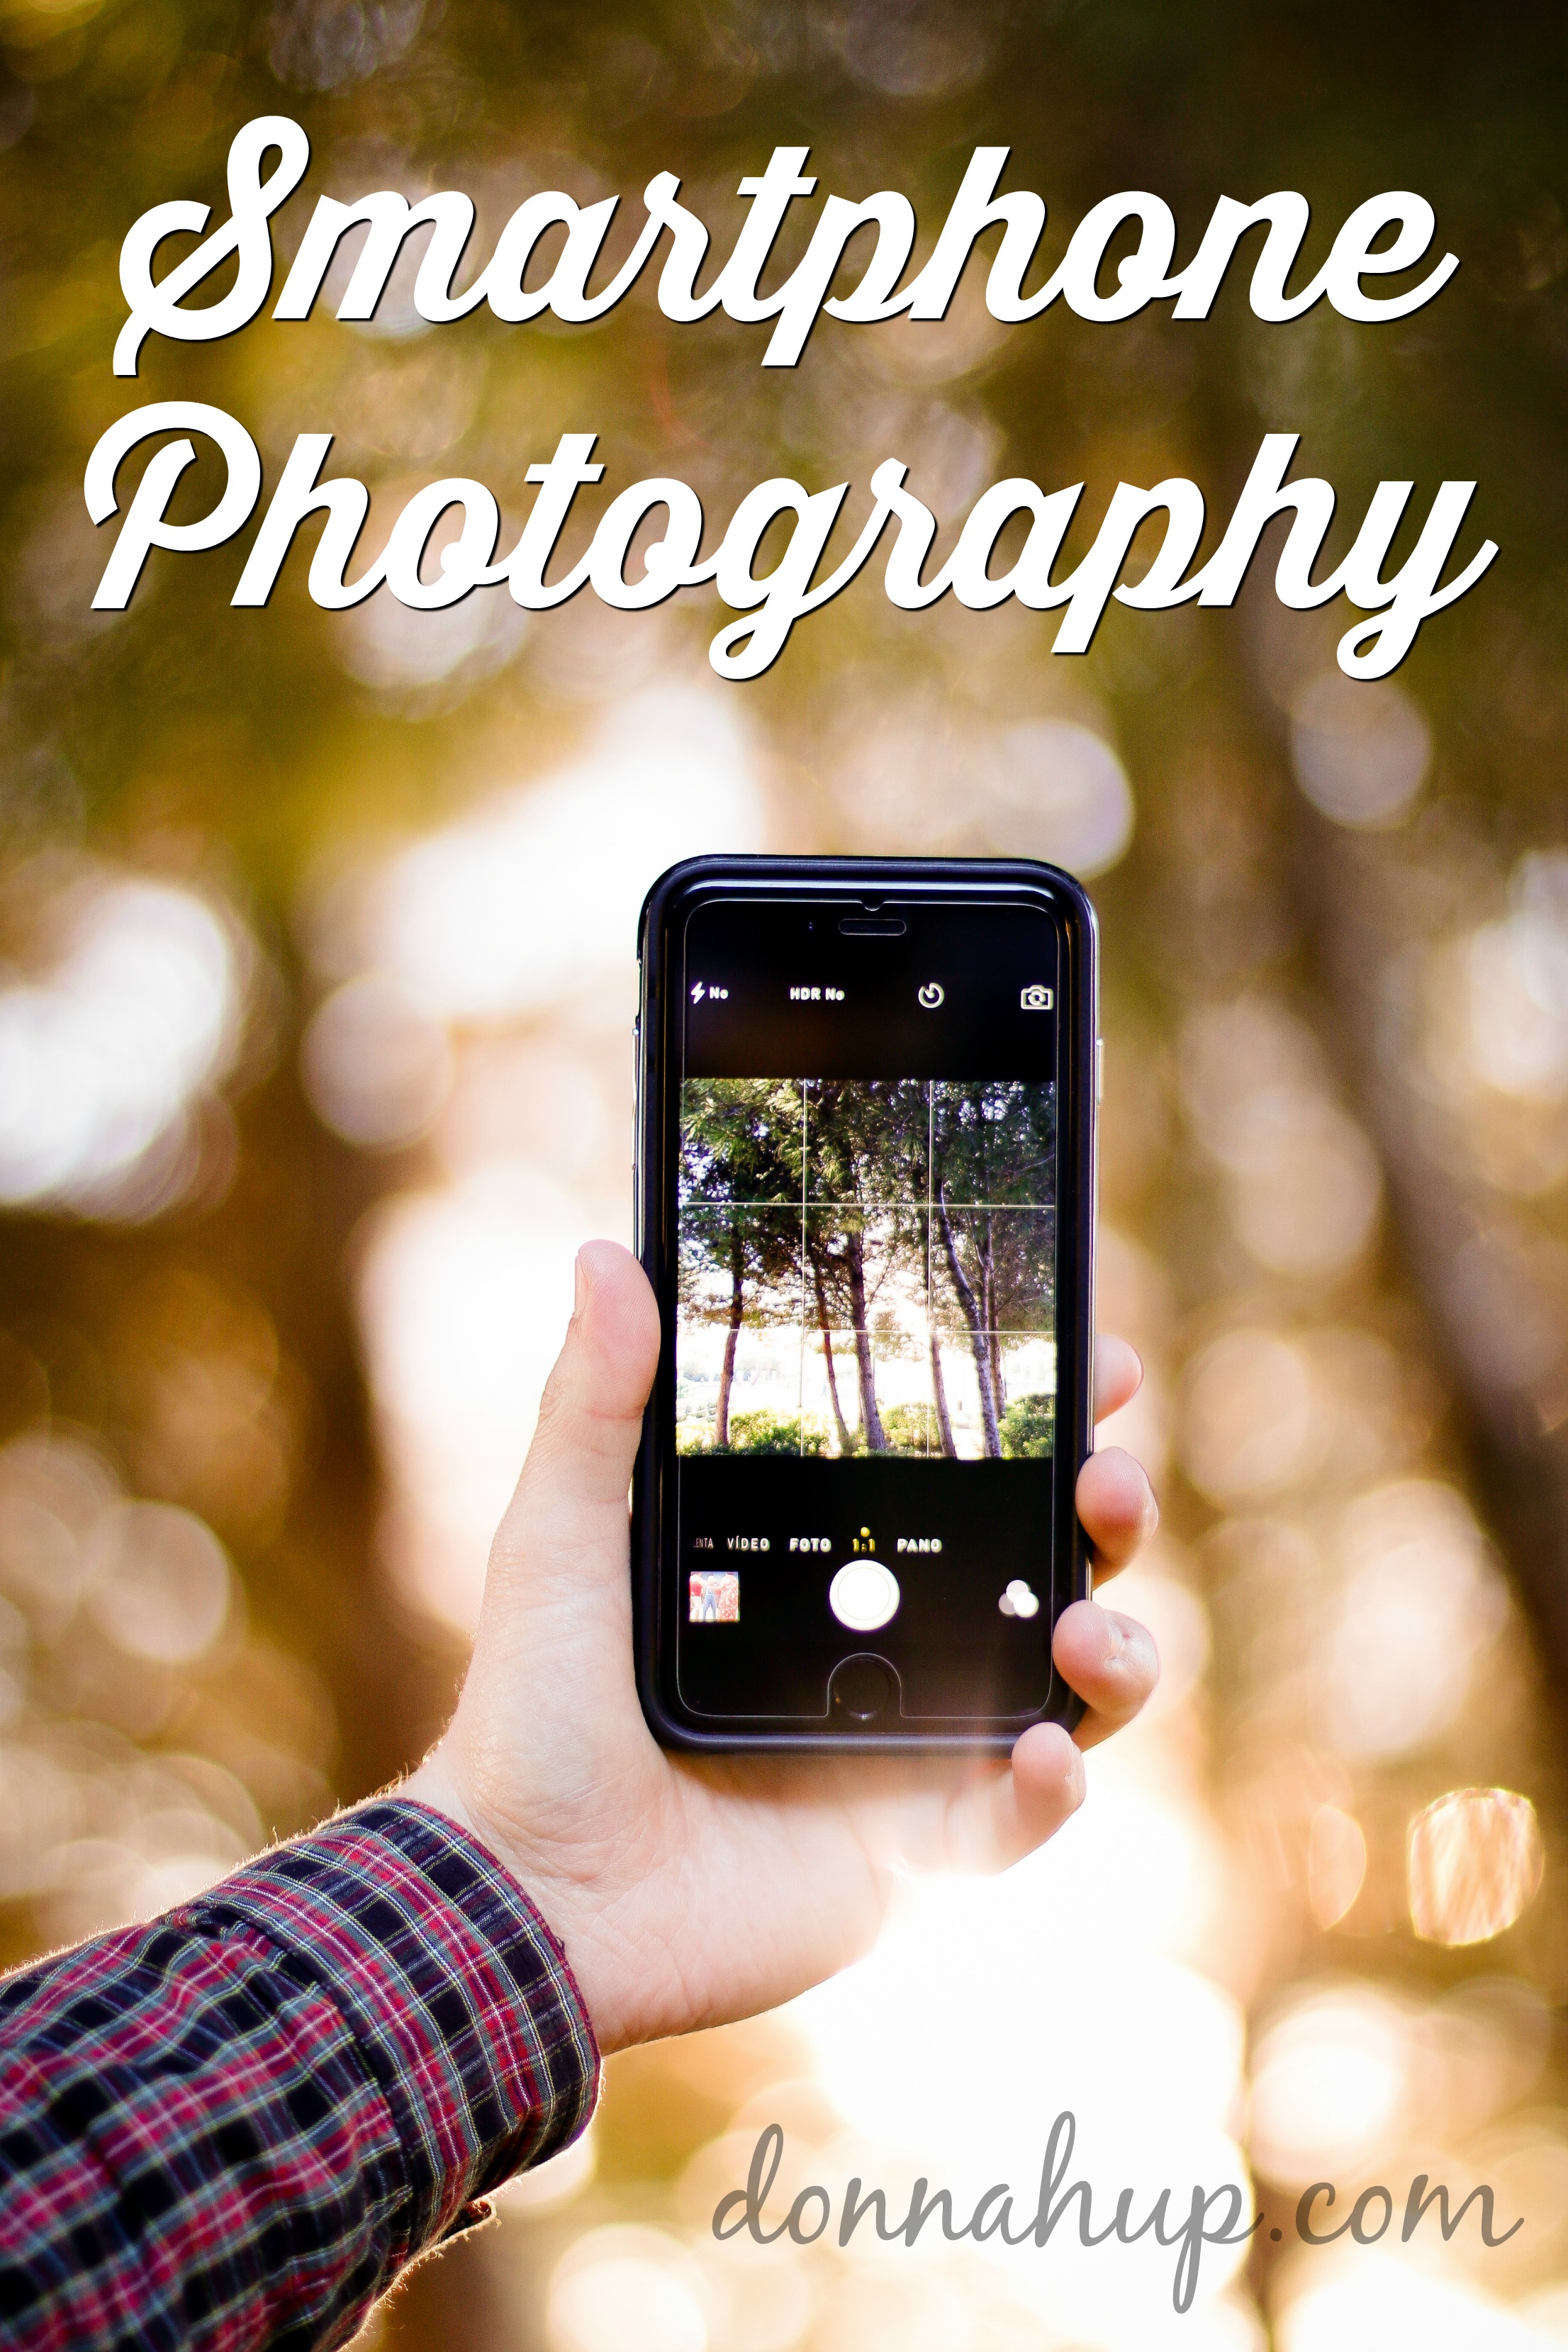 Smartphone Photography Apps and Tips #BetterMoments